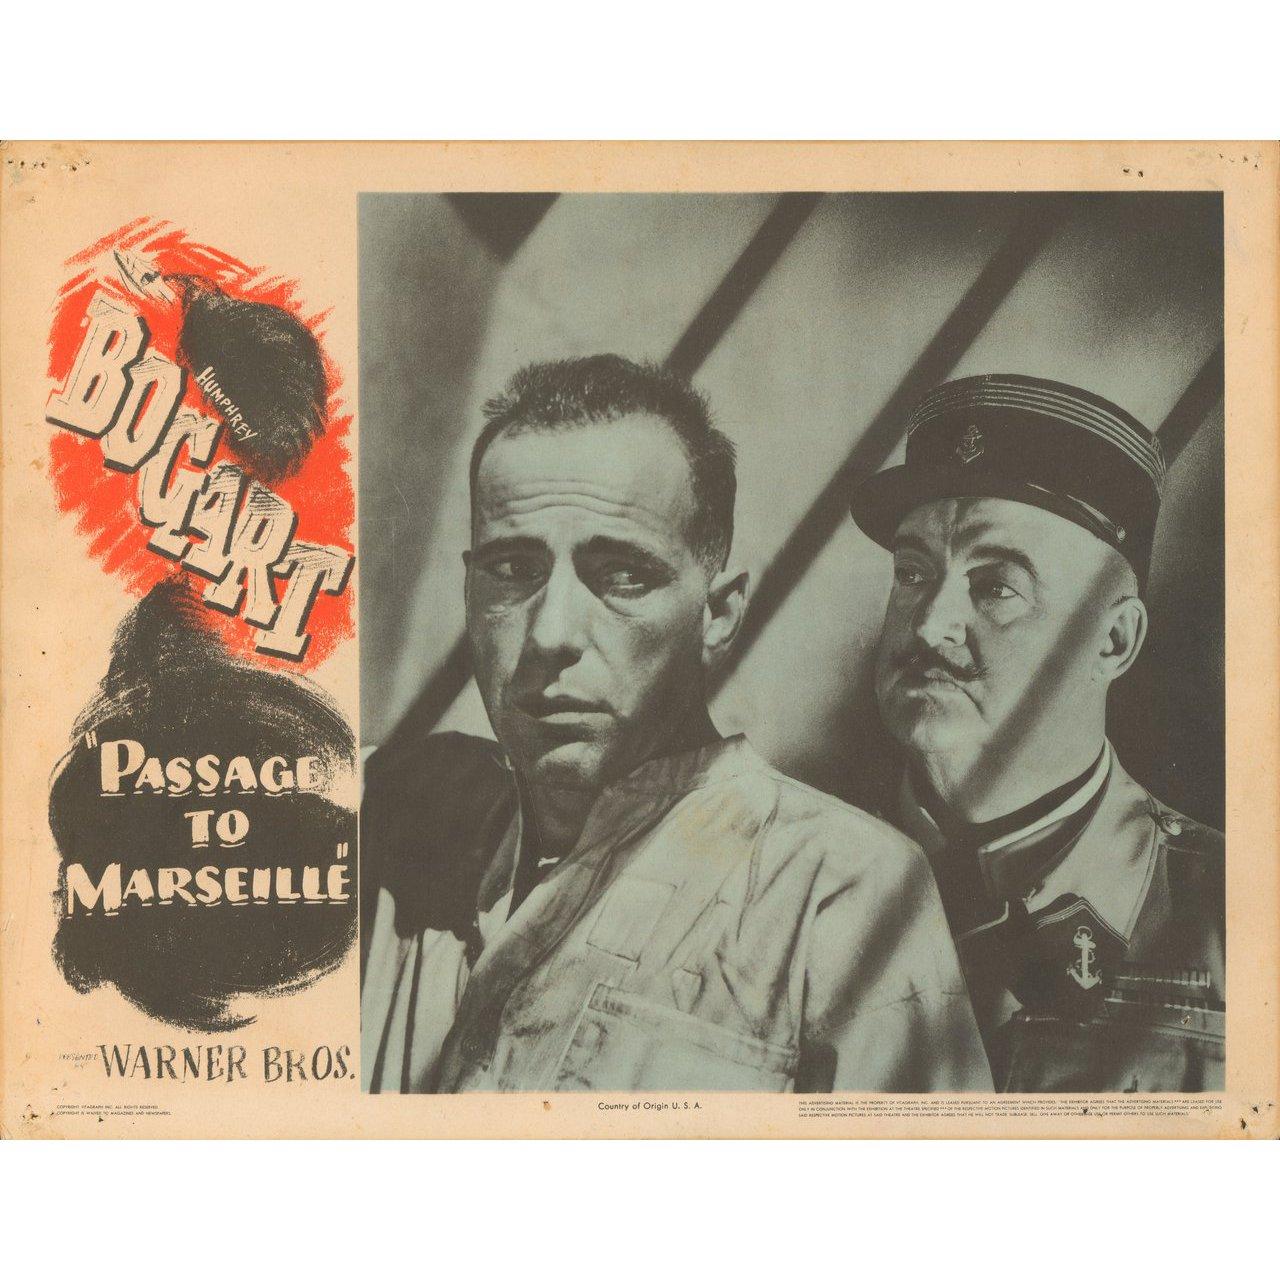 Original 1944 U.S. scene card for the film Passage to Marseille directed by Michael Curtiz with Humphrey Bogart / Claude Rains / Michele Morgan / Philip Dorn. Very Good condition, pinholes. Please note: the size is stated in inches and the actual